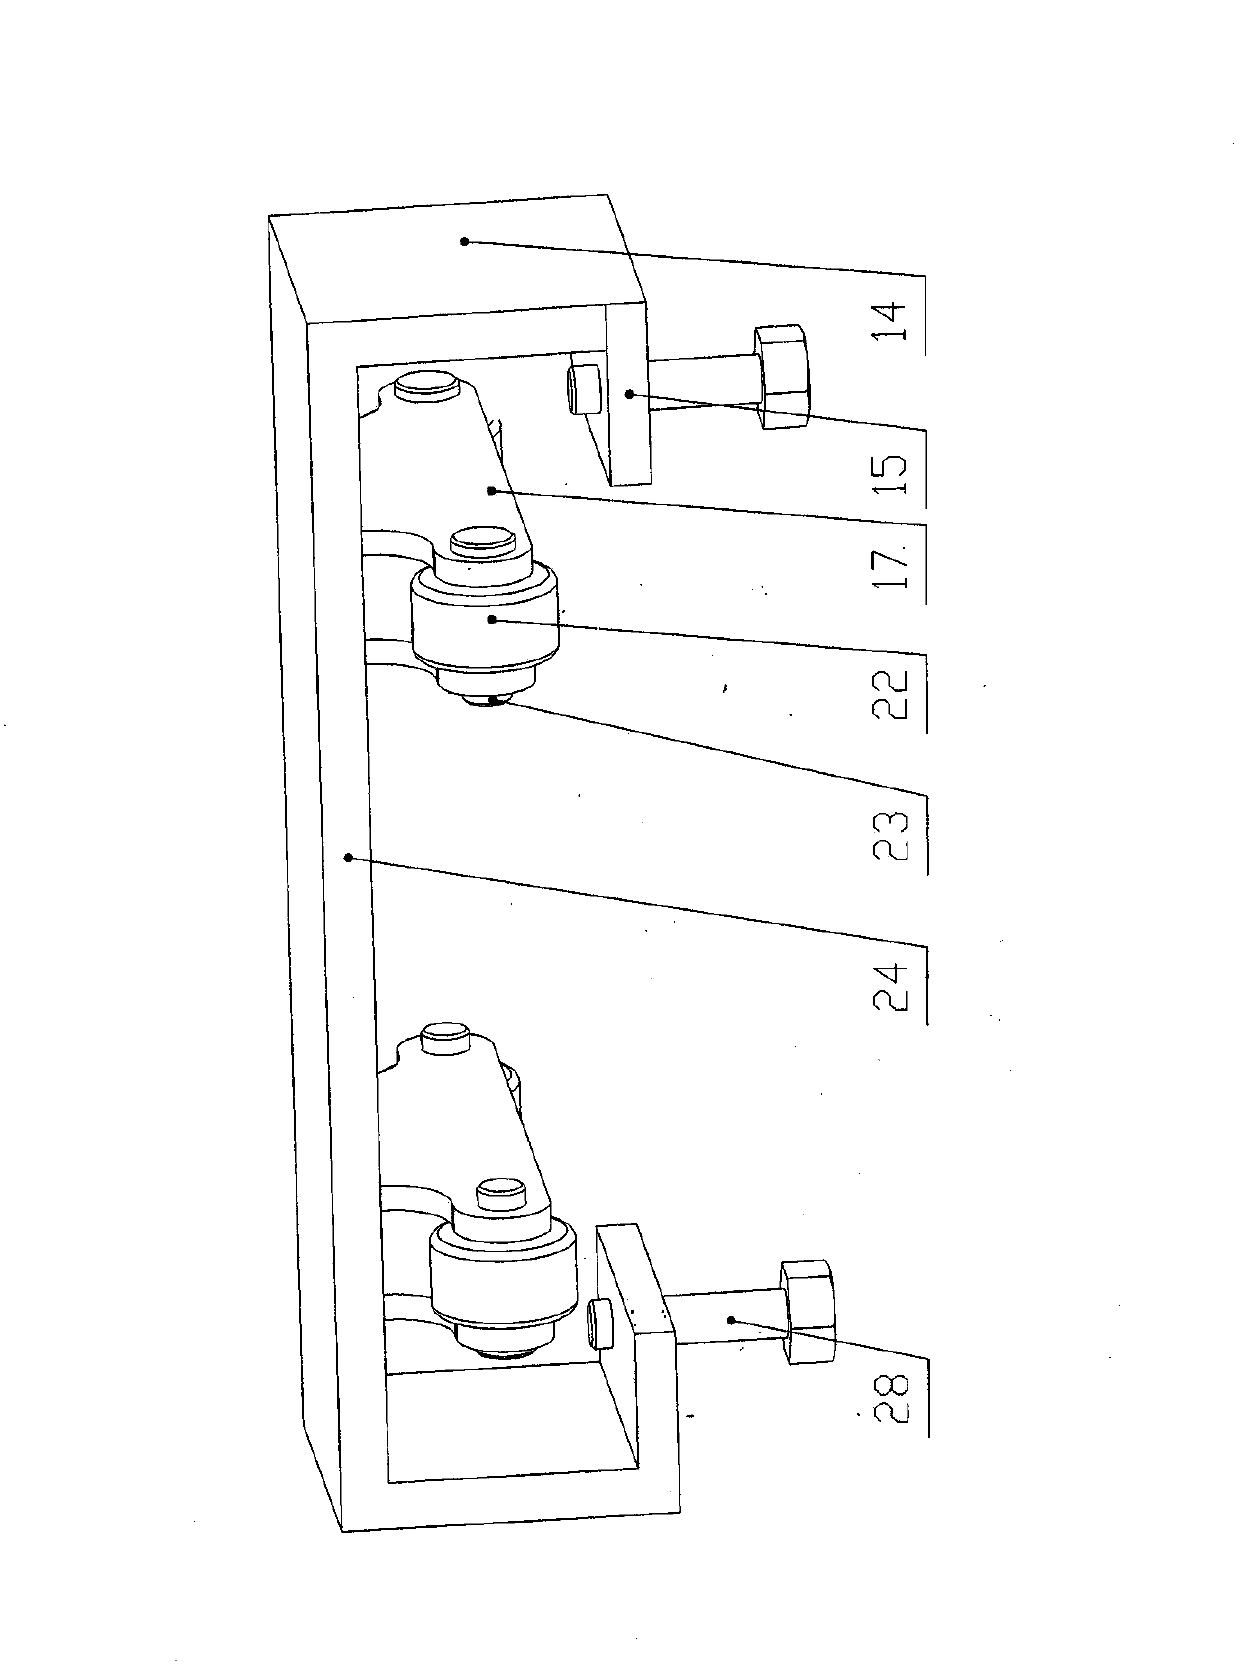 Adjustable tight pressing device for forming mill